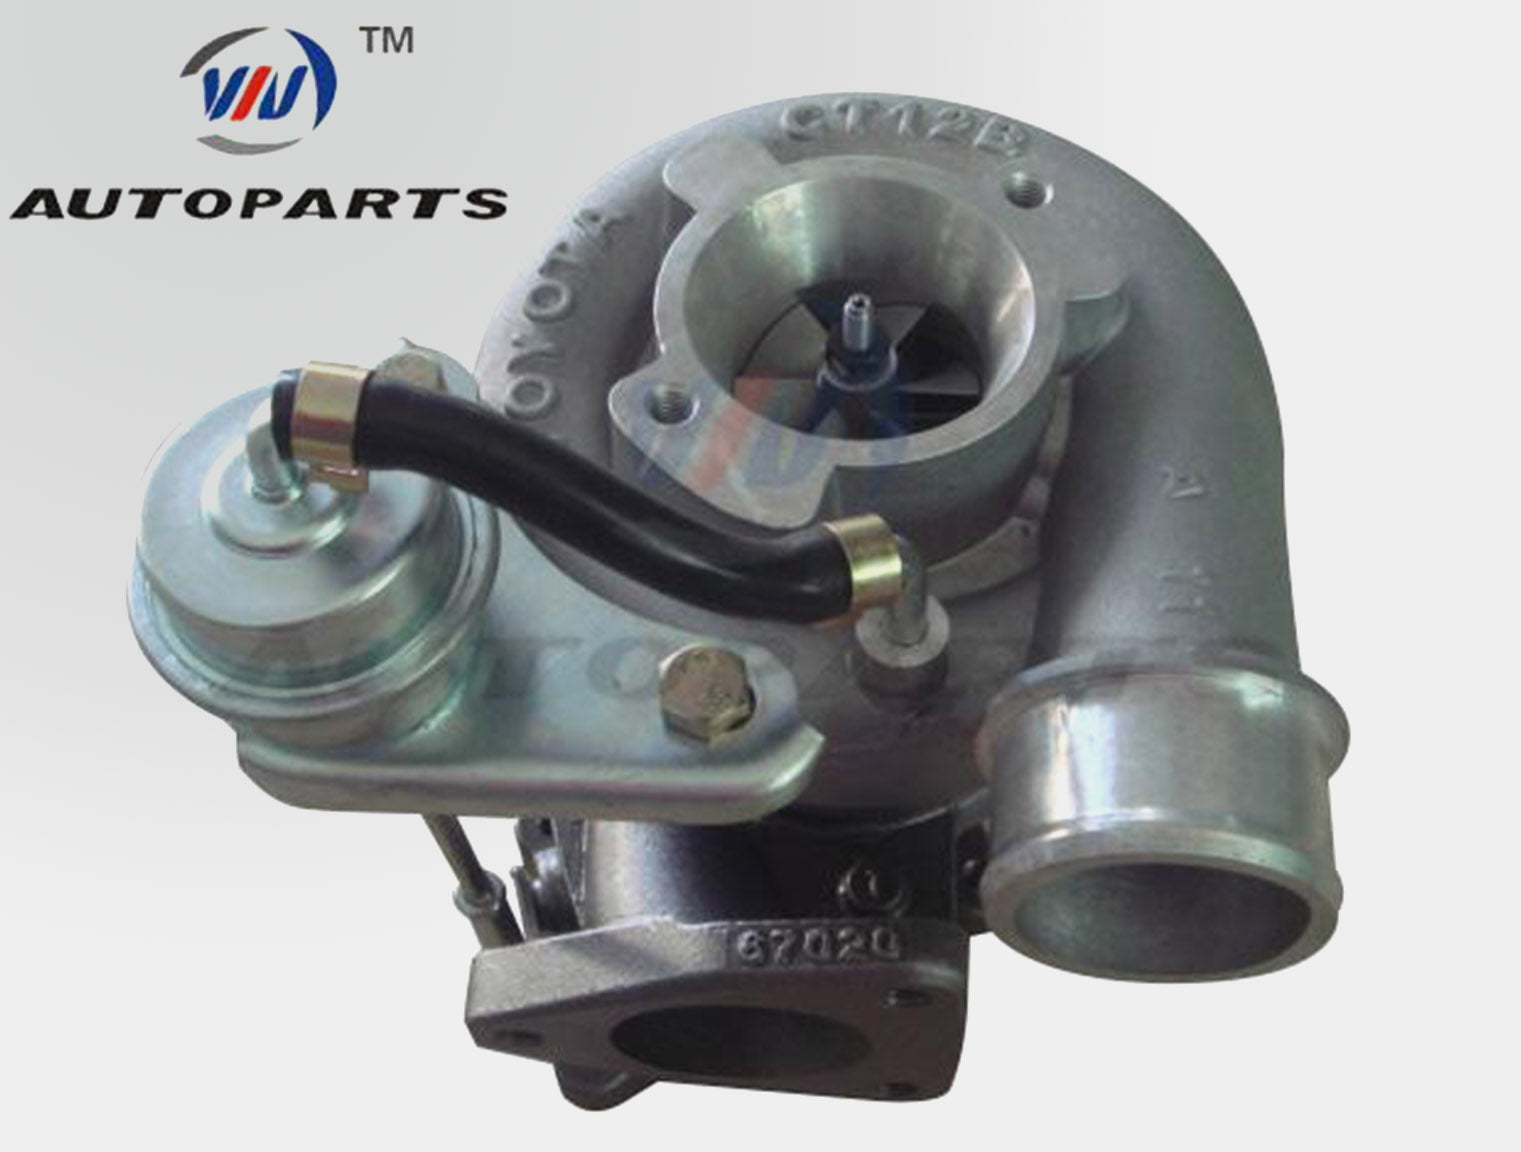 Turbocharger 17201-67040 for Toyota Land Cruiser TD with 1KZ-TE 3.0L D